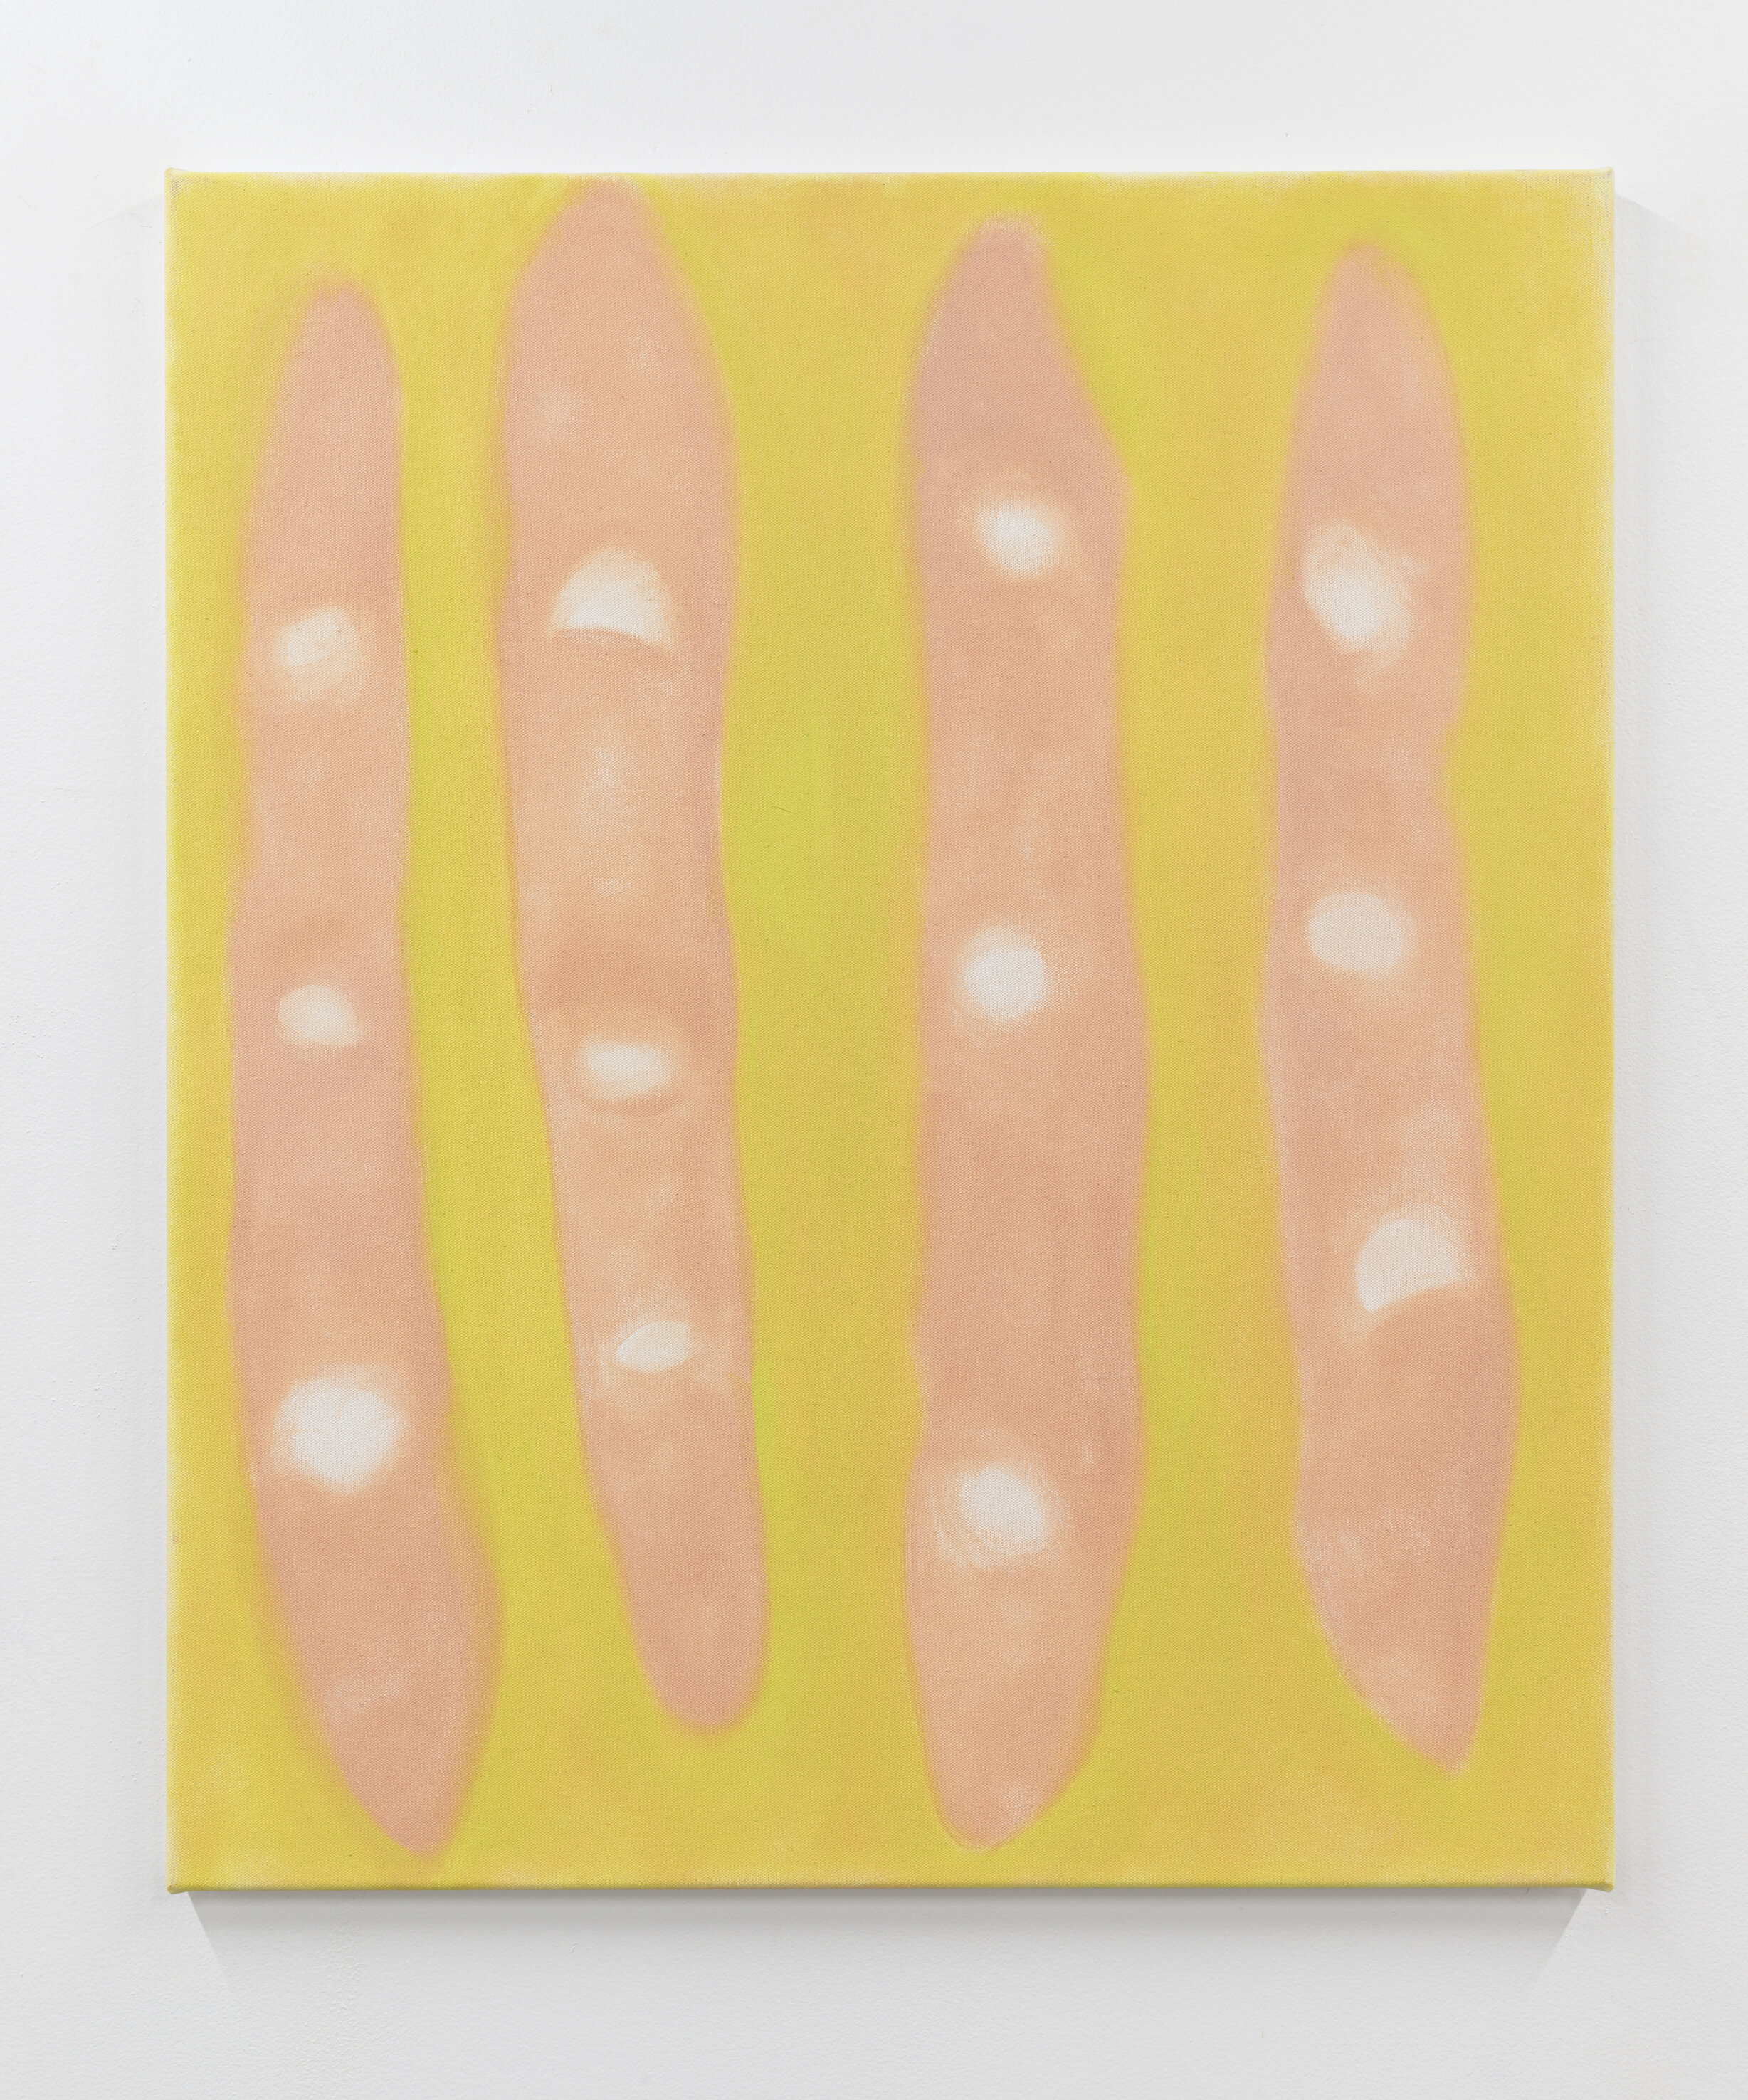  George Gittins,  Baguettes (no. 22) , 2019  Oil on canvas , 31 x 26 inches 